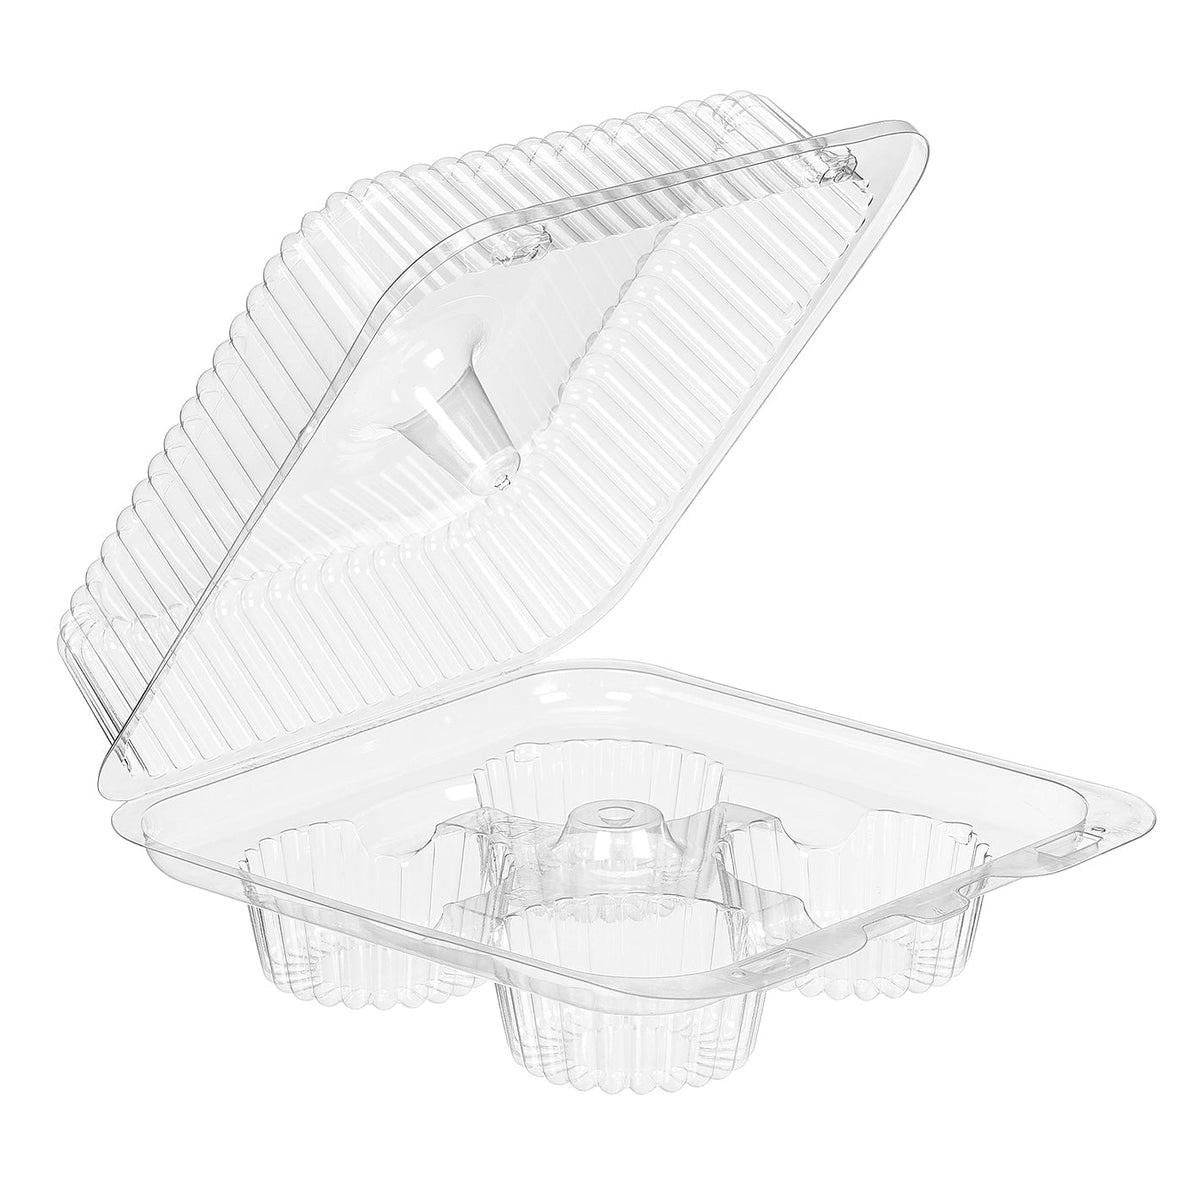 https://www.bakersauthoritys.shop/wp-content/uploads/1692/15/find-inspiration-at-every-detail-of-4-cavity-clear-hinged-tray-7-slp45-inline-plastics-corp-x_0.jpg